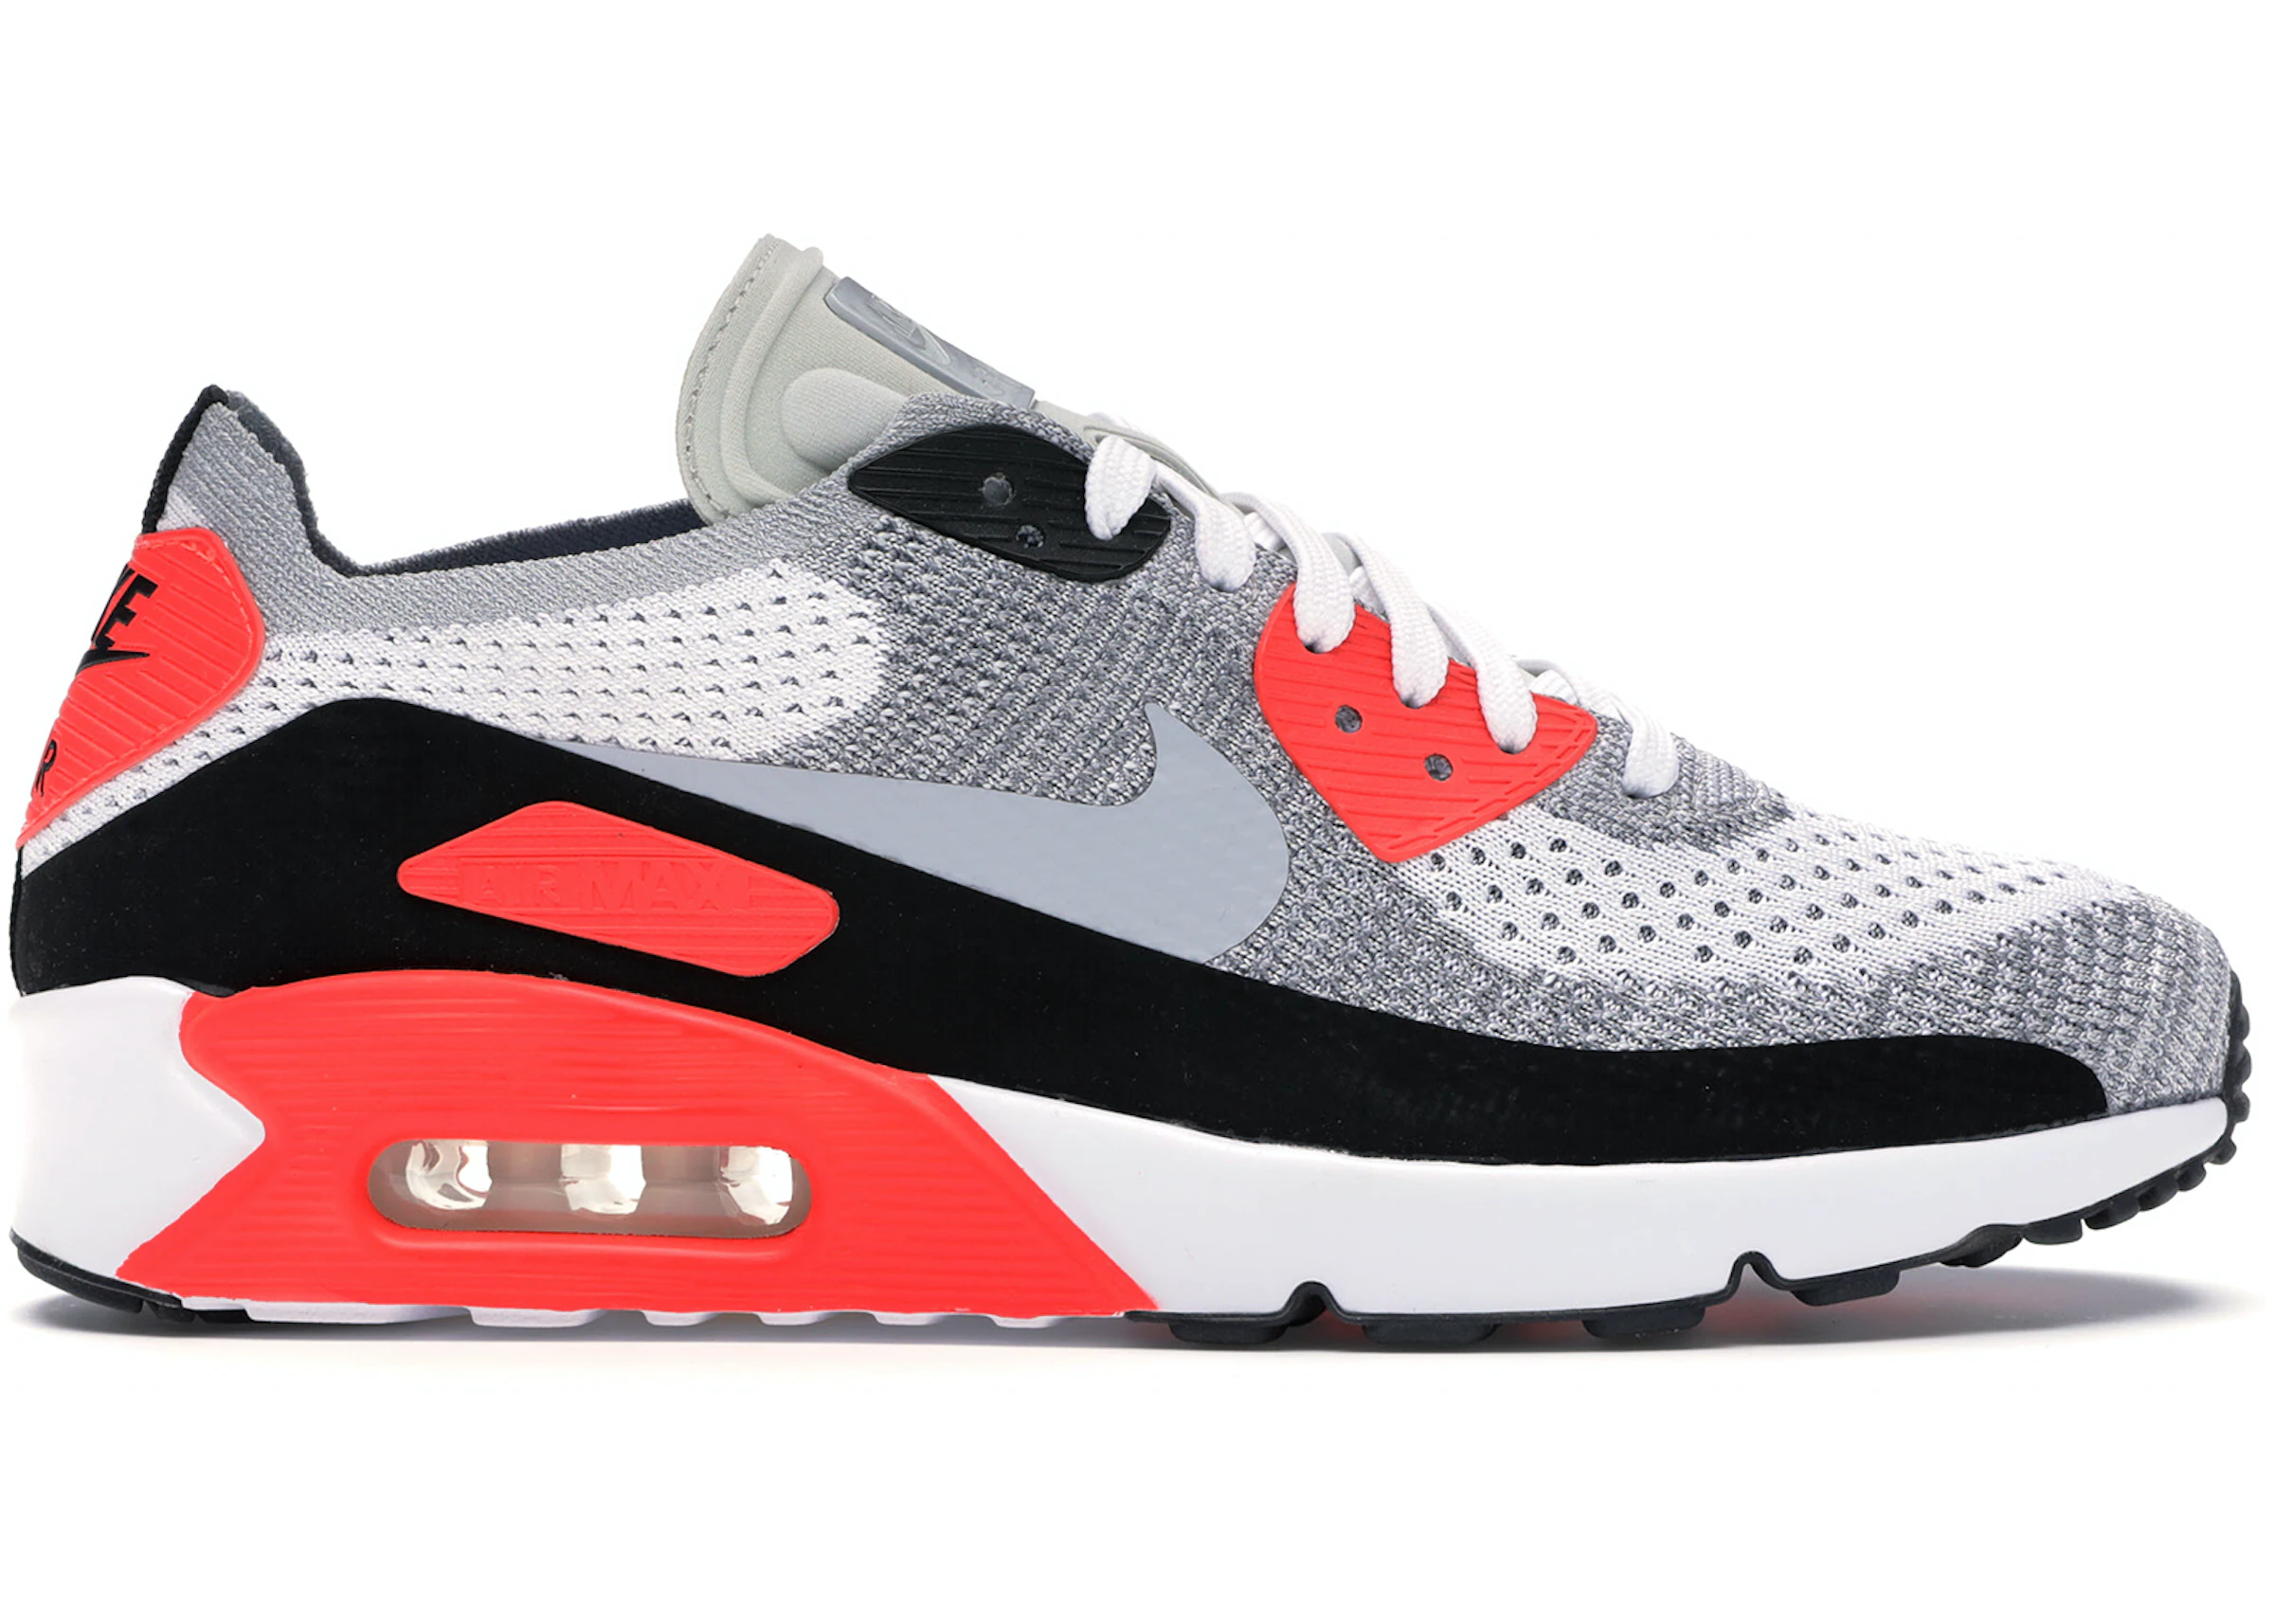 erosion Mispend Them Nike Air Max 90 Ultra Flyknit 2.0 Infrared - 875943-100 - US